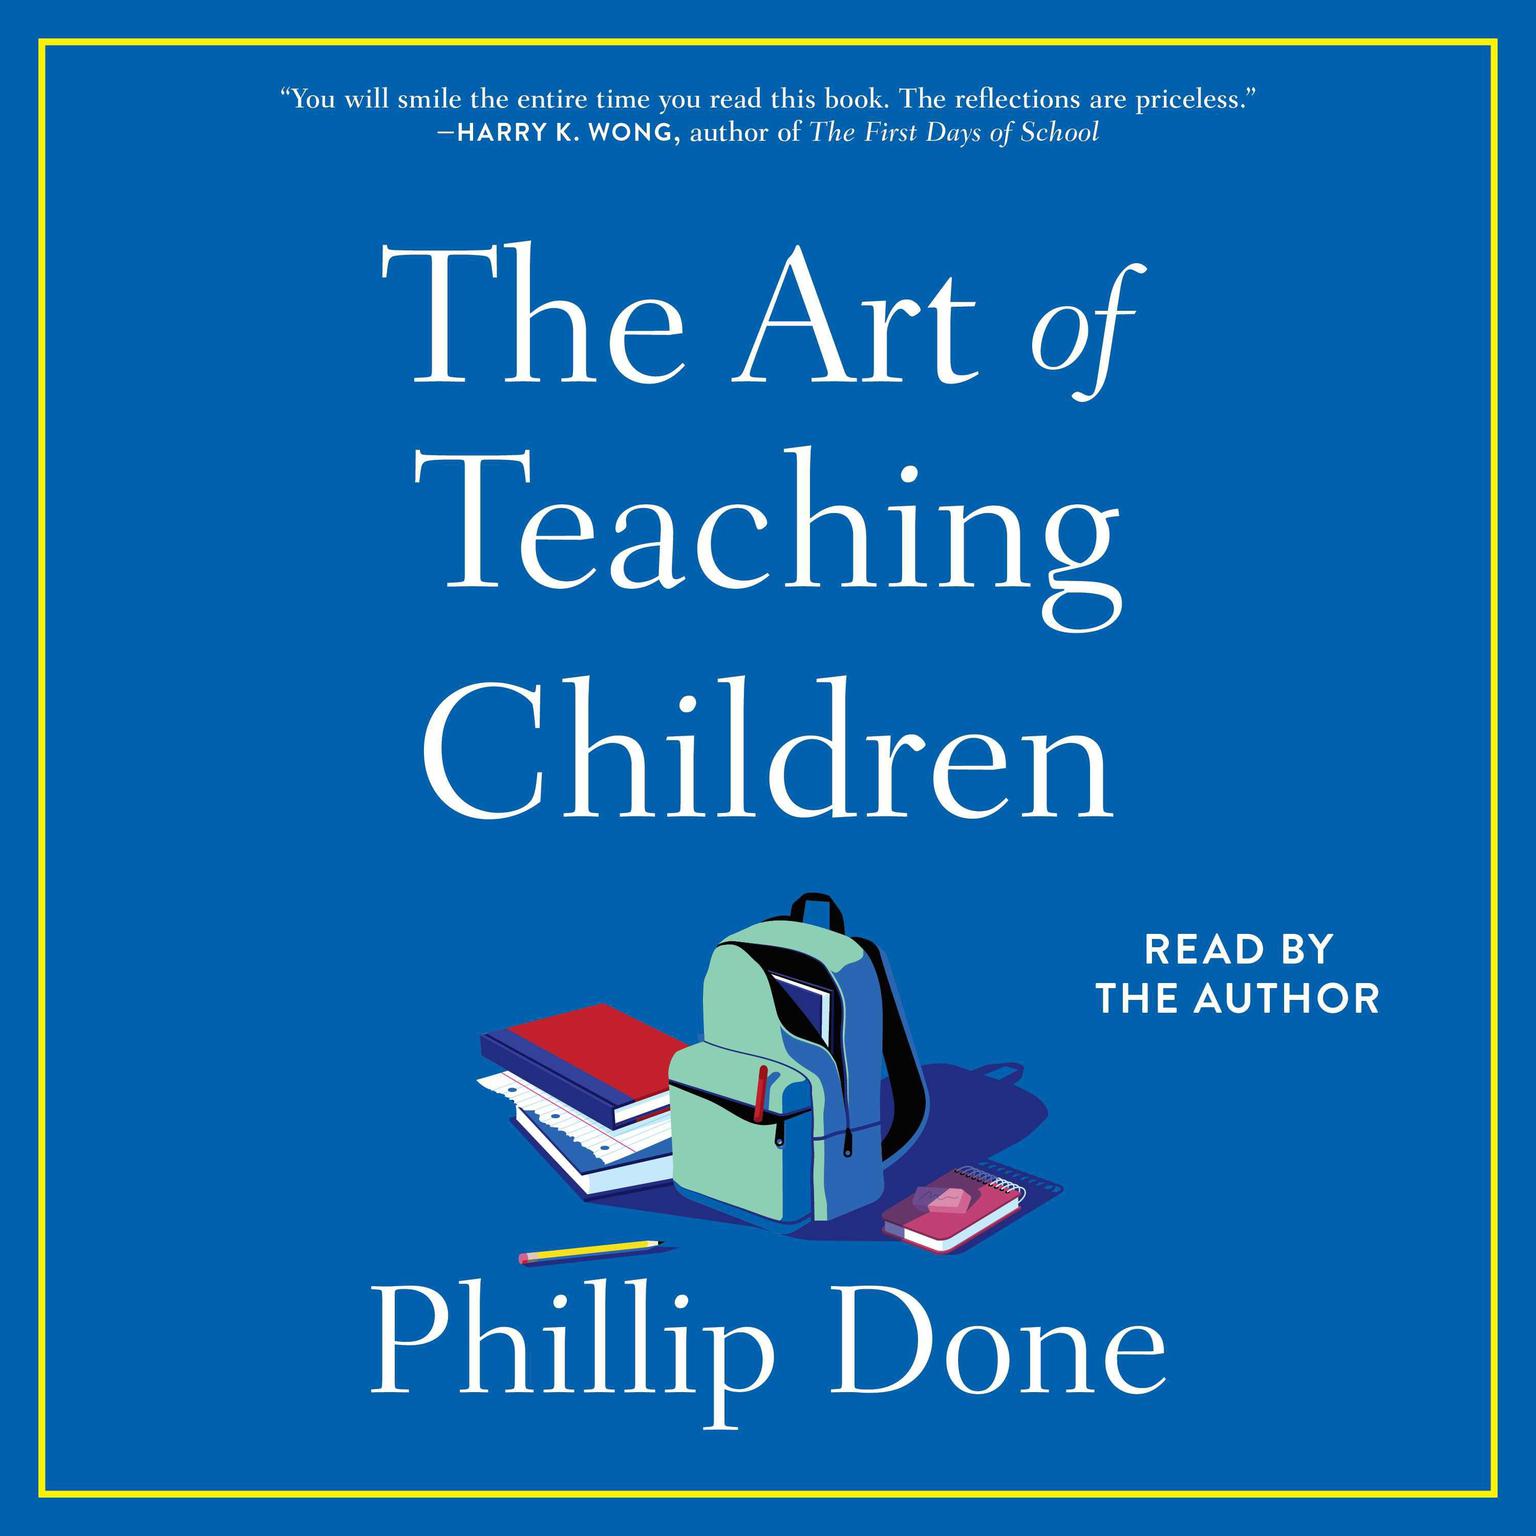 The Art of Teaching Children: All I Learned from a Lifetime in the Classroom Audiobook, by Phillip Done